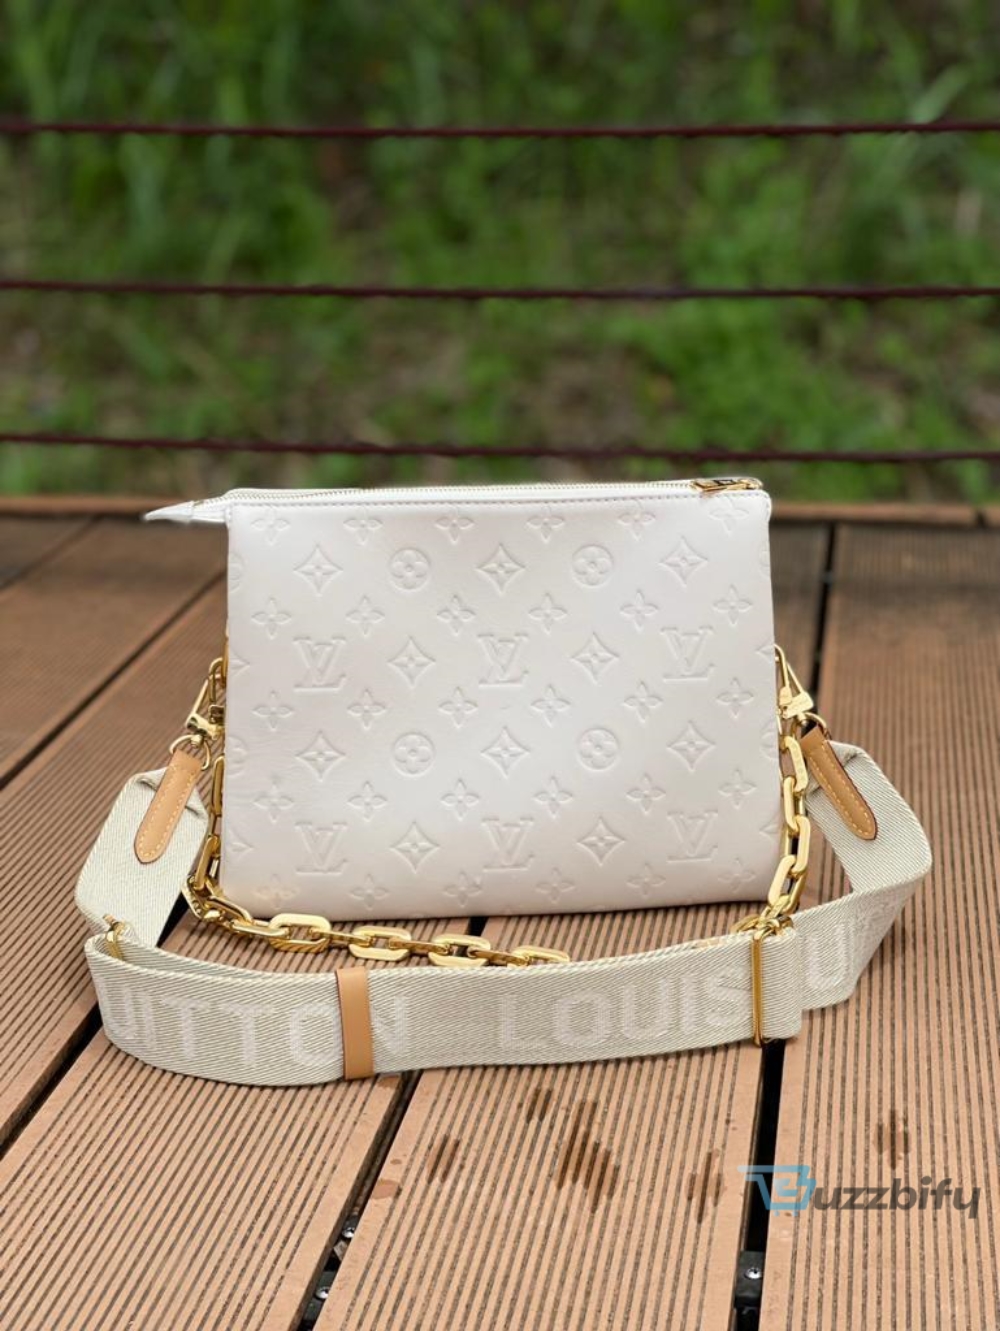 louis vuitton coussin pm monogram embossed puffy white for women womens handbags shoulder and crossbody bags 102in26cm lv m57793 2799 buzzbify 1 33